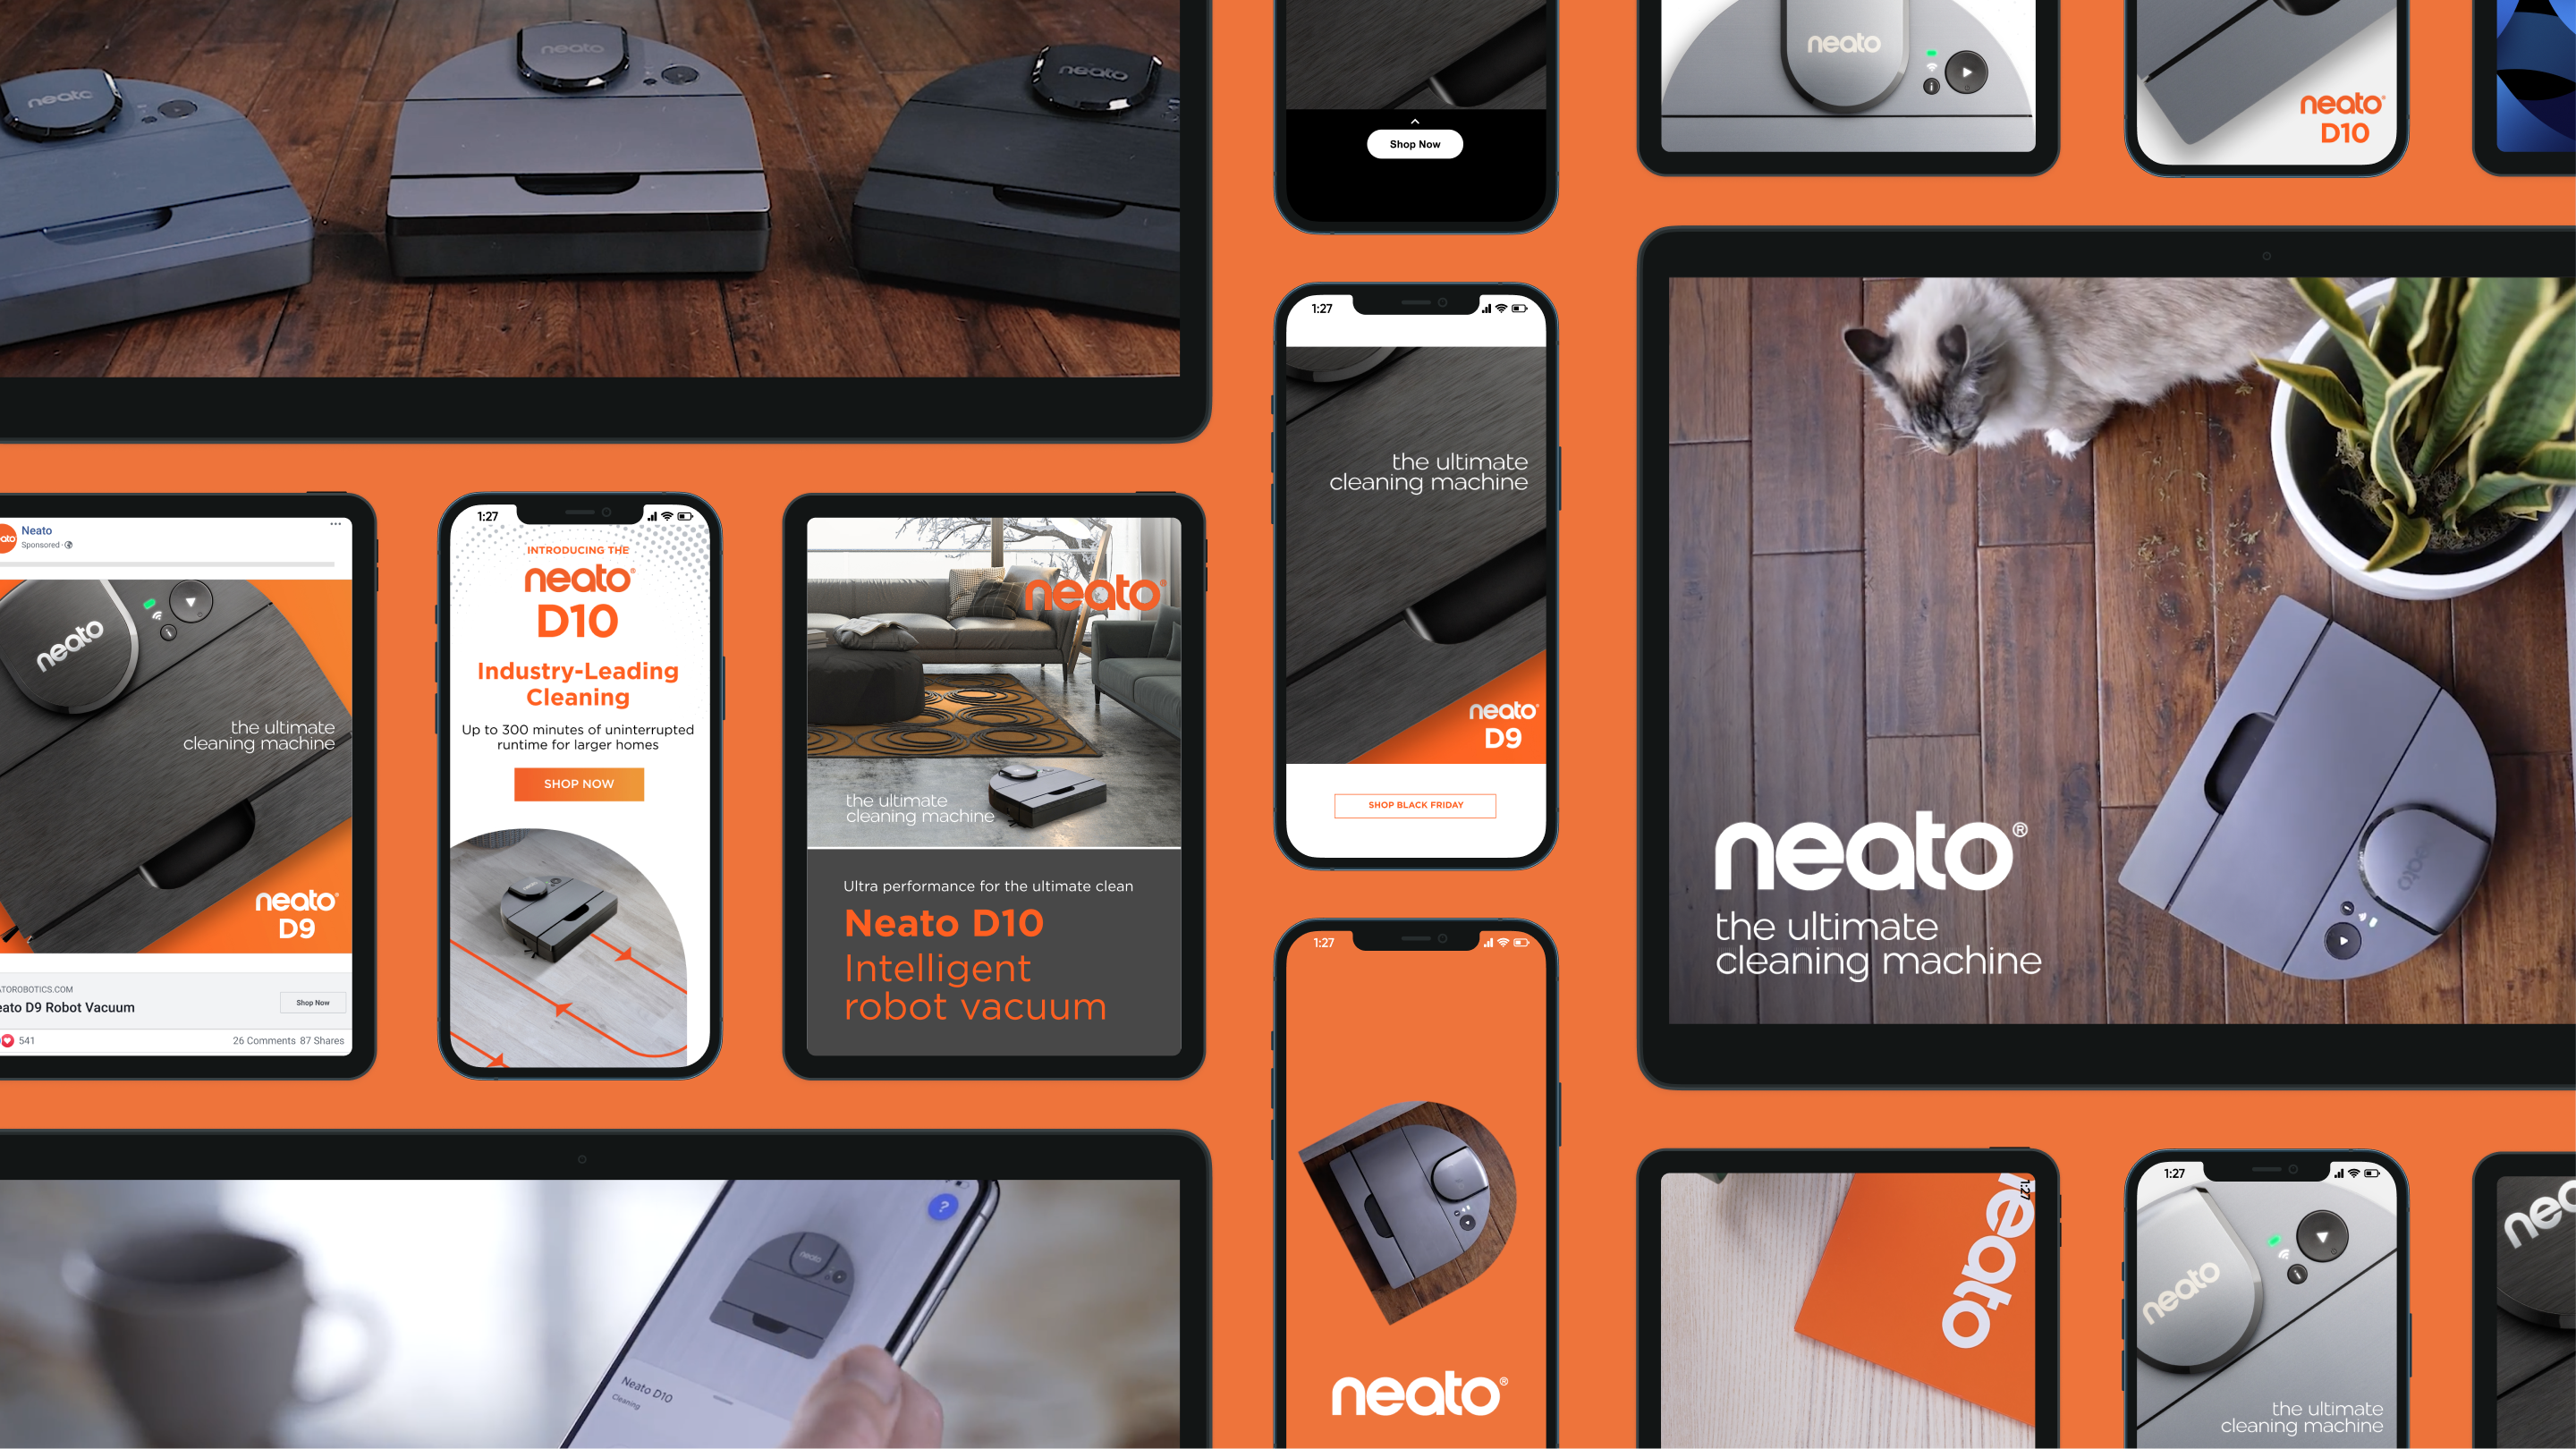 Various Neato Robotics ads and images on various sized mobile devices.